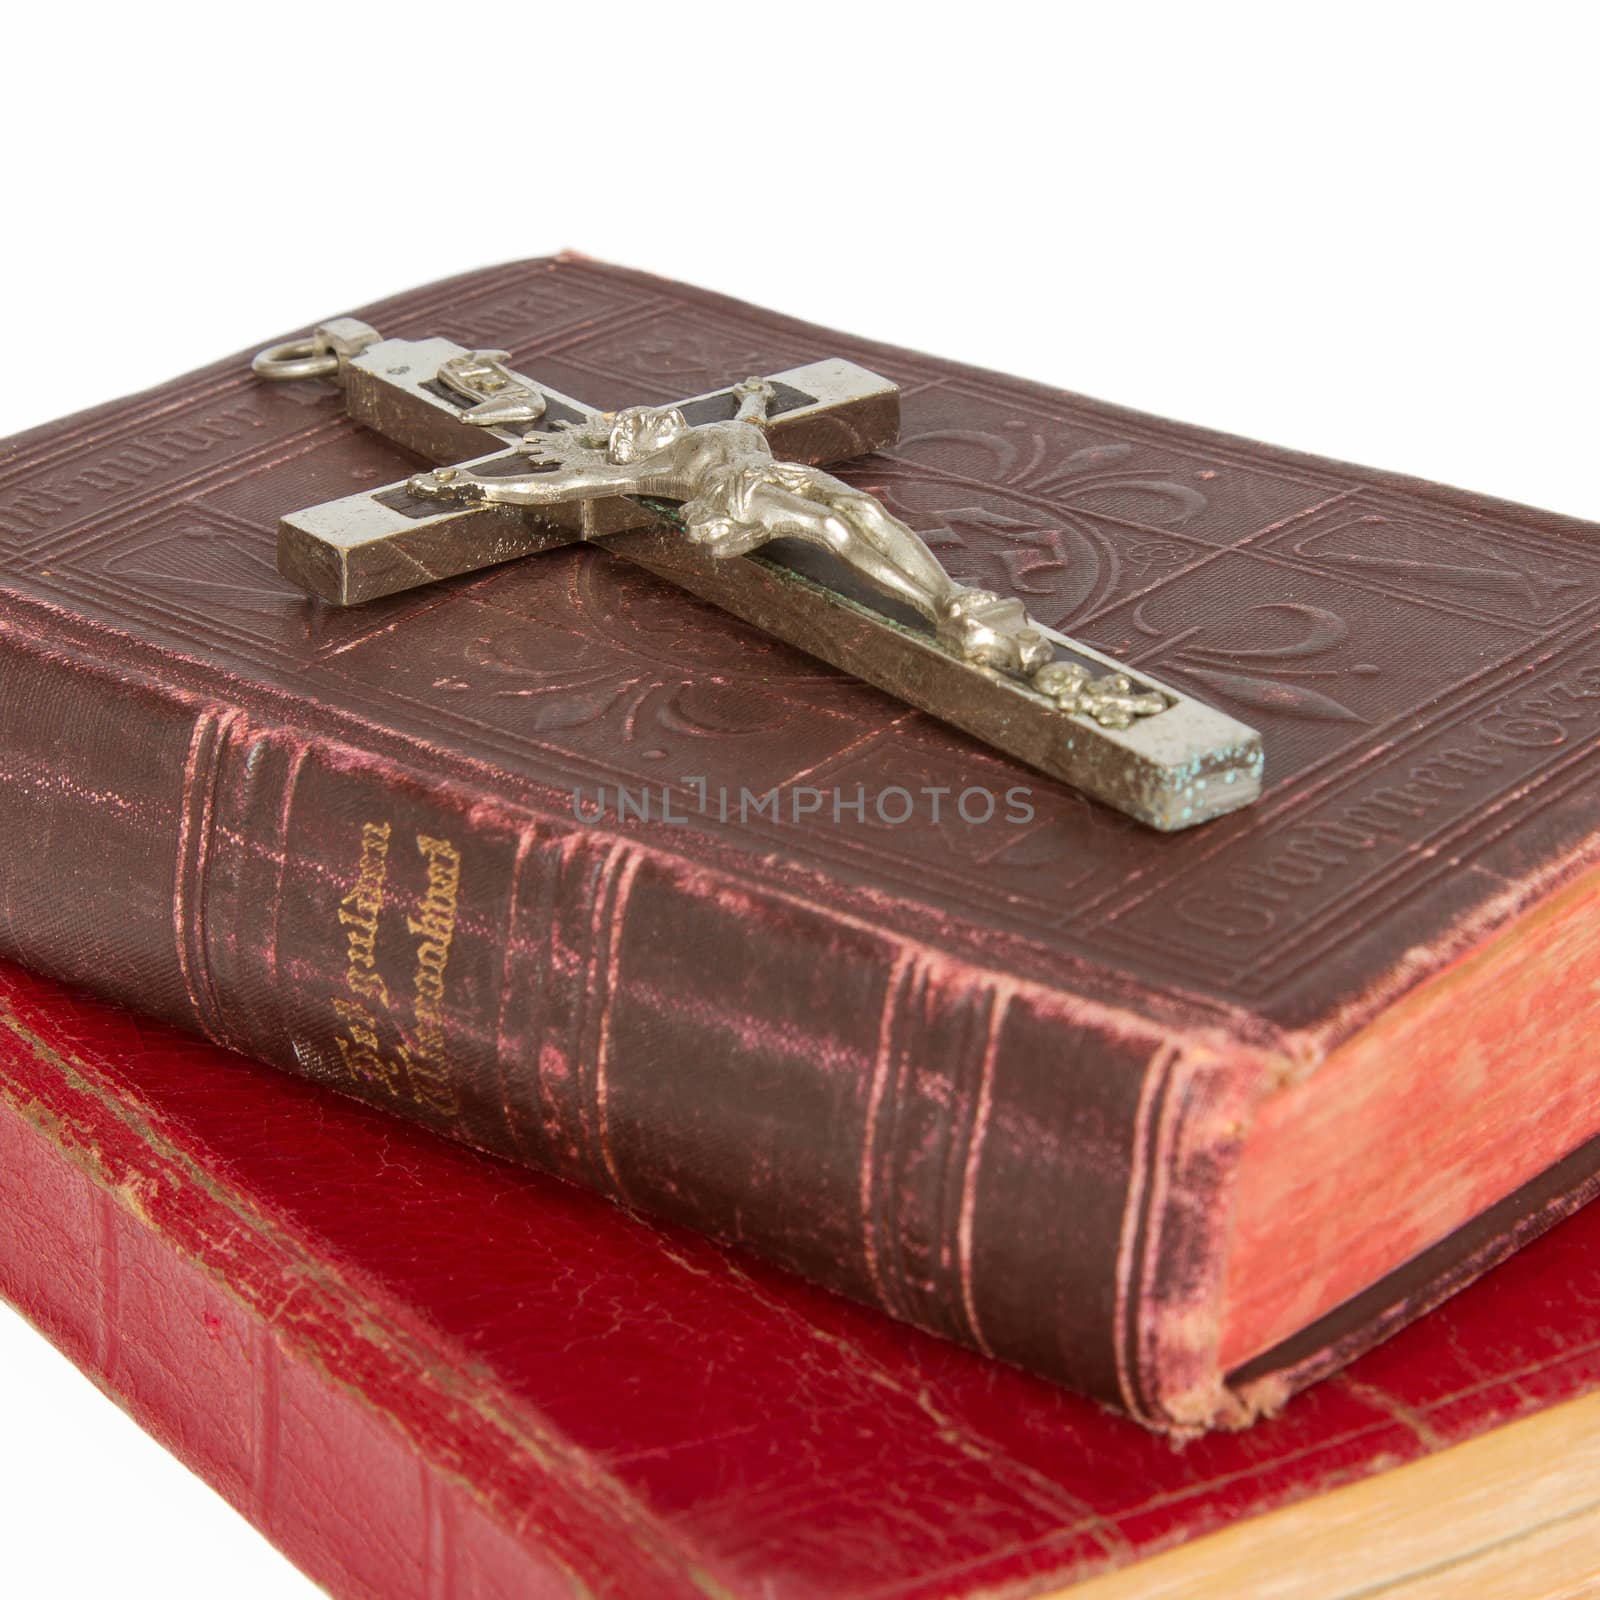 Old antique bible and cross on a white background, isolated